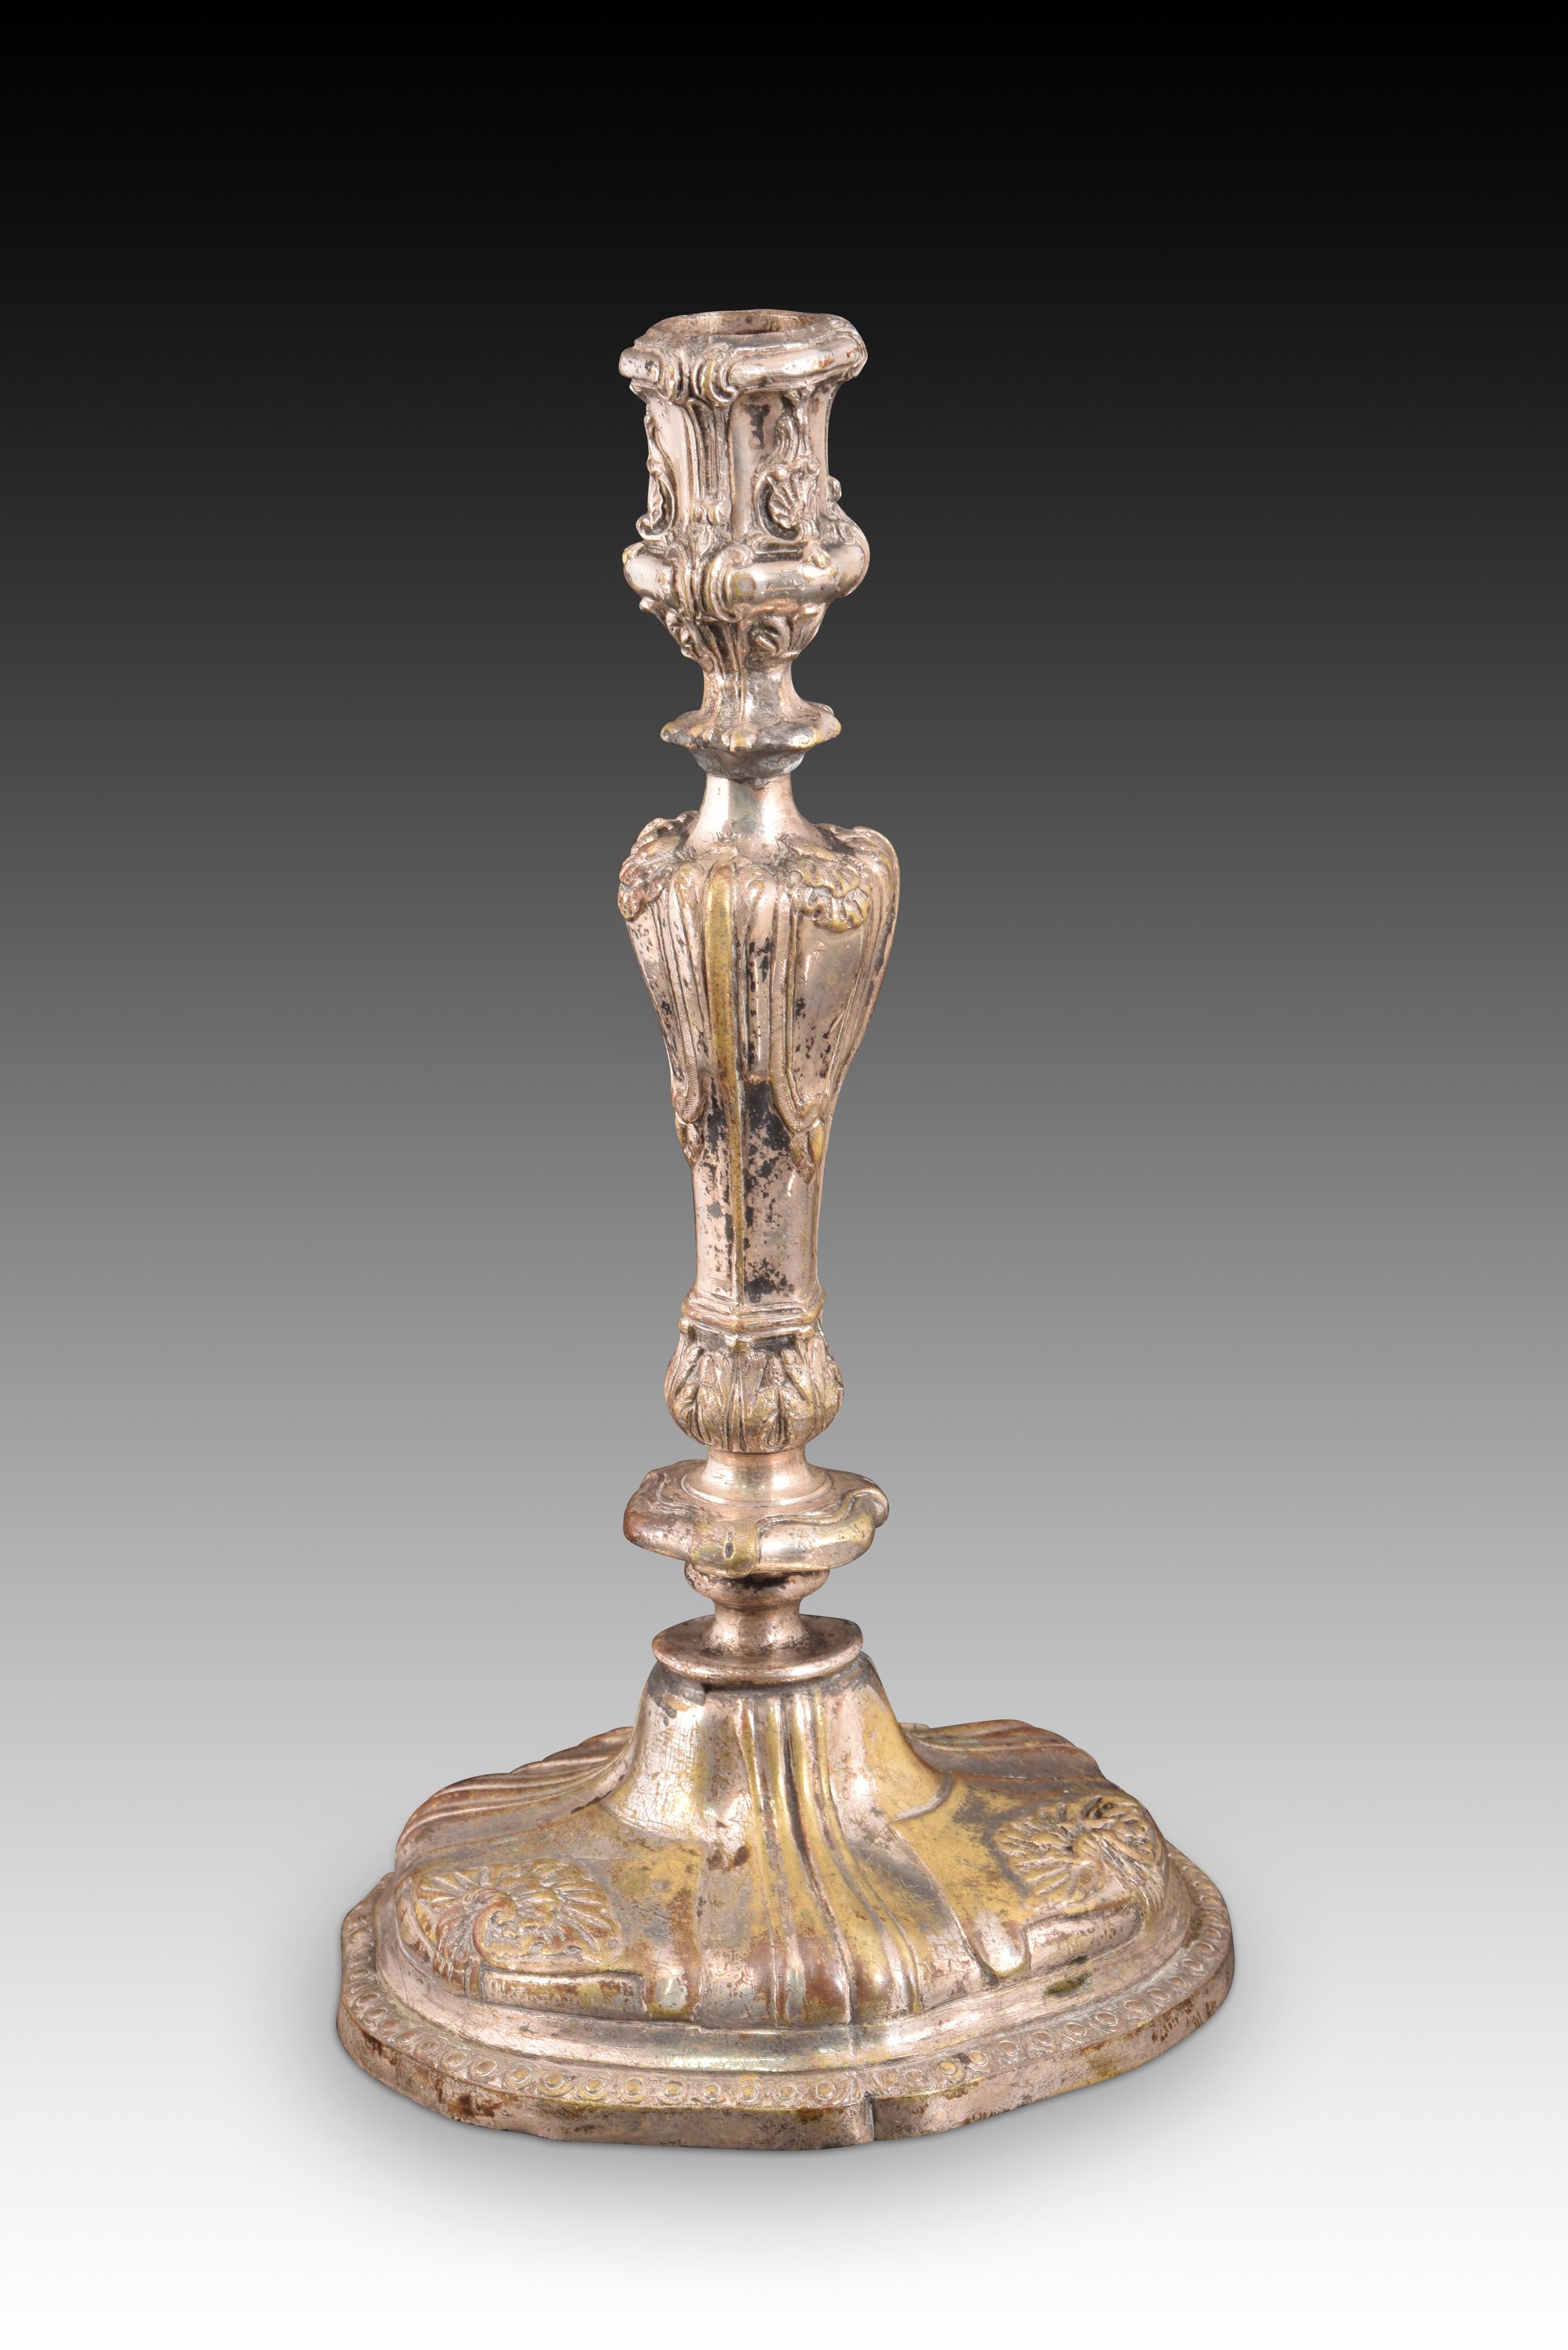 Neoclassical Revival Candlestick or candle holder. Bronze. 19th century. For Sale